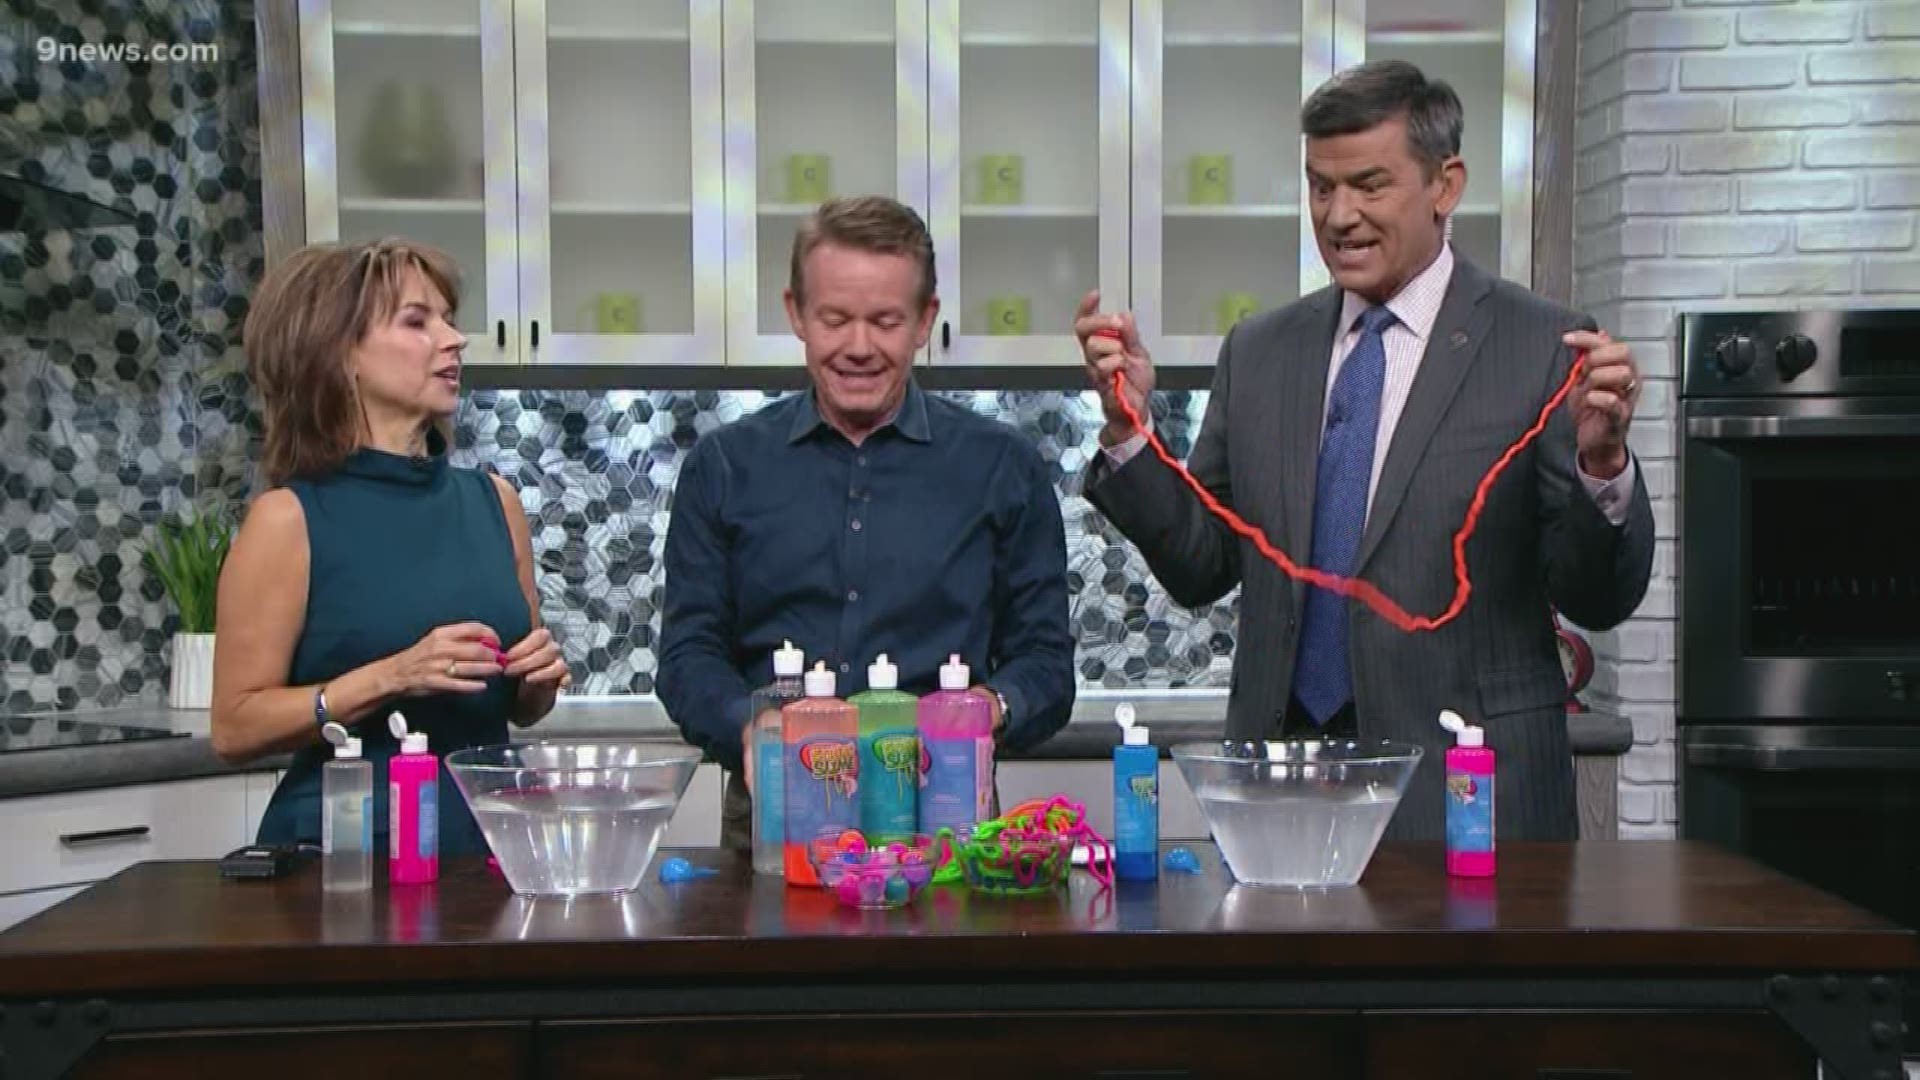 Just when you thought the slime craze was over, our science guy Steve Spangler comes up with a new version of slime that you’ve never seen.